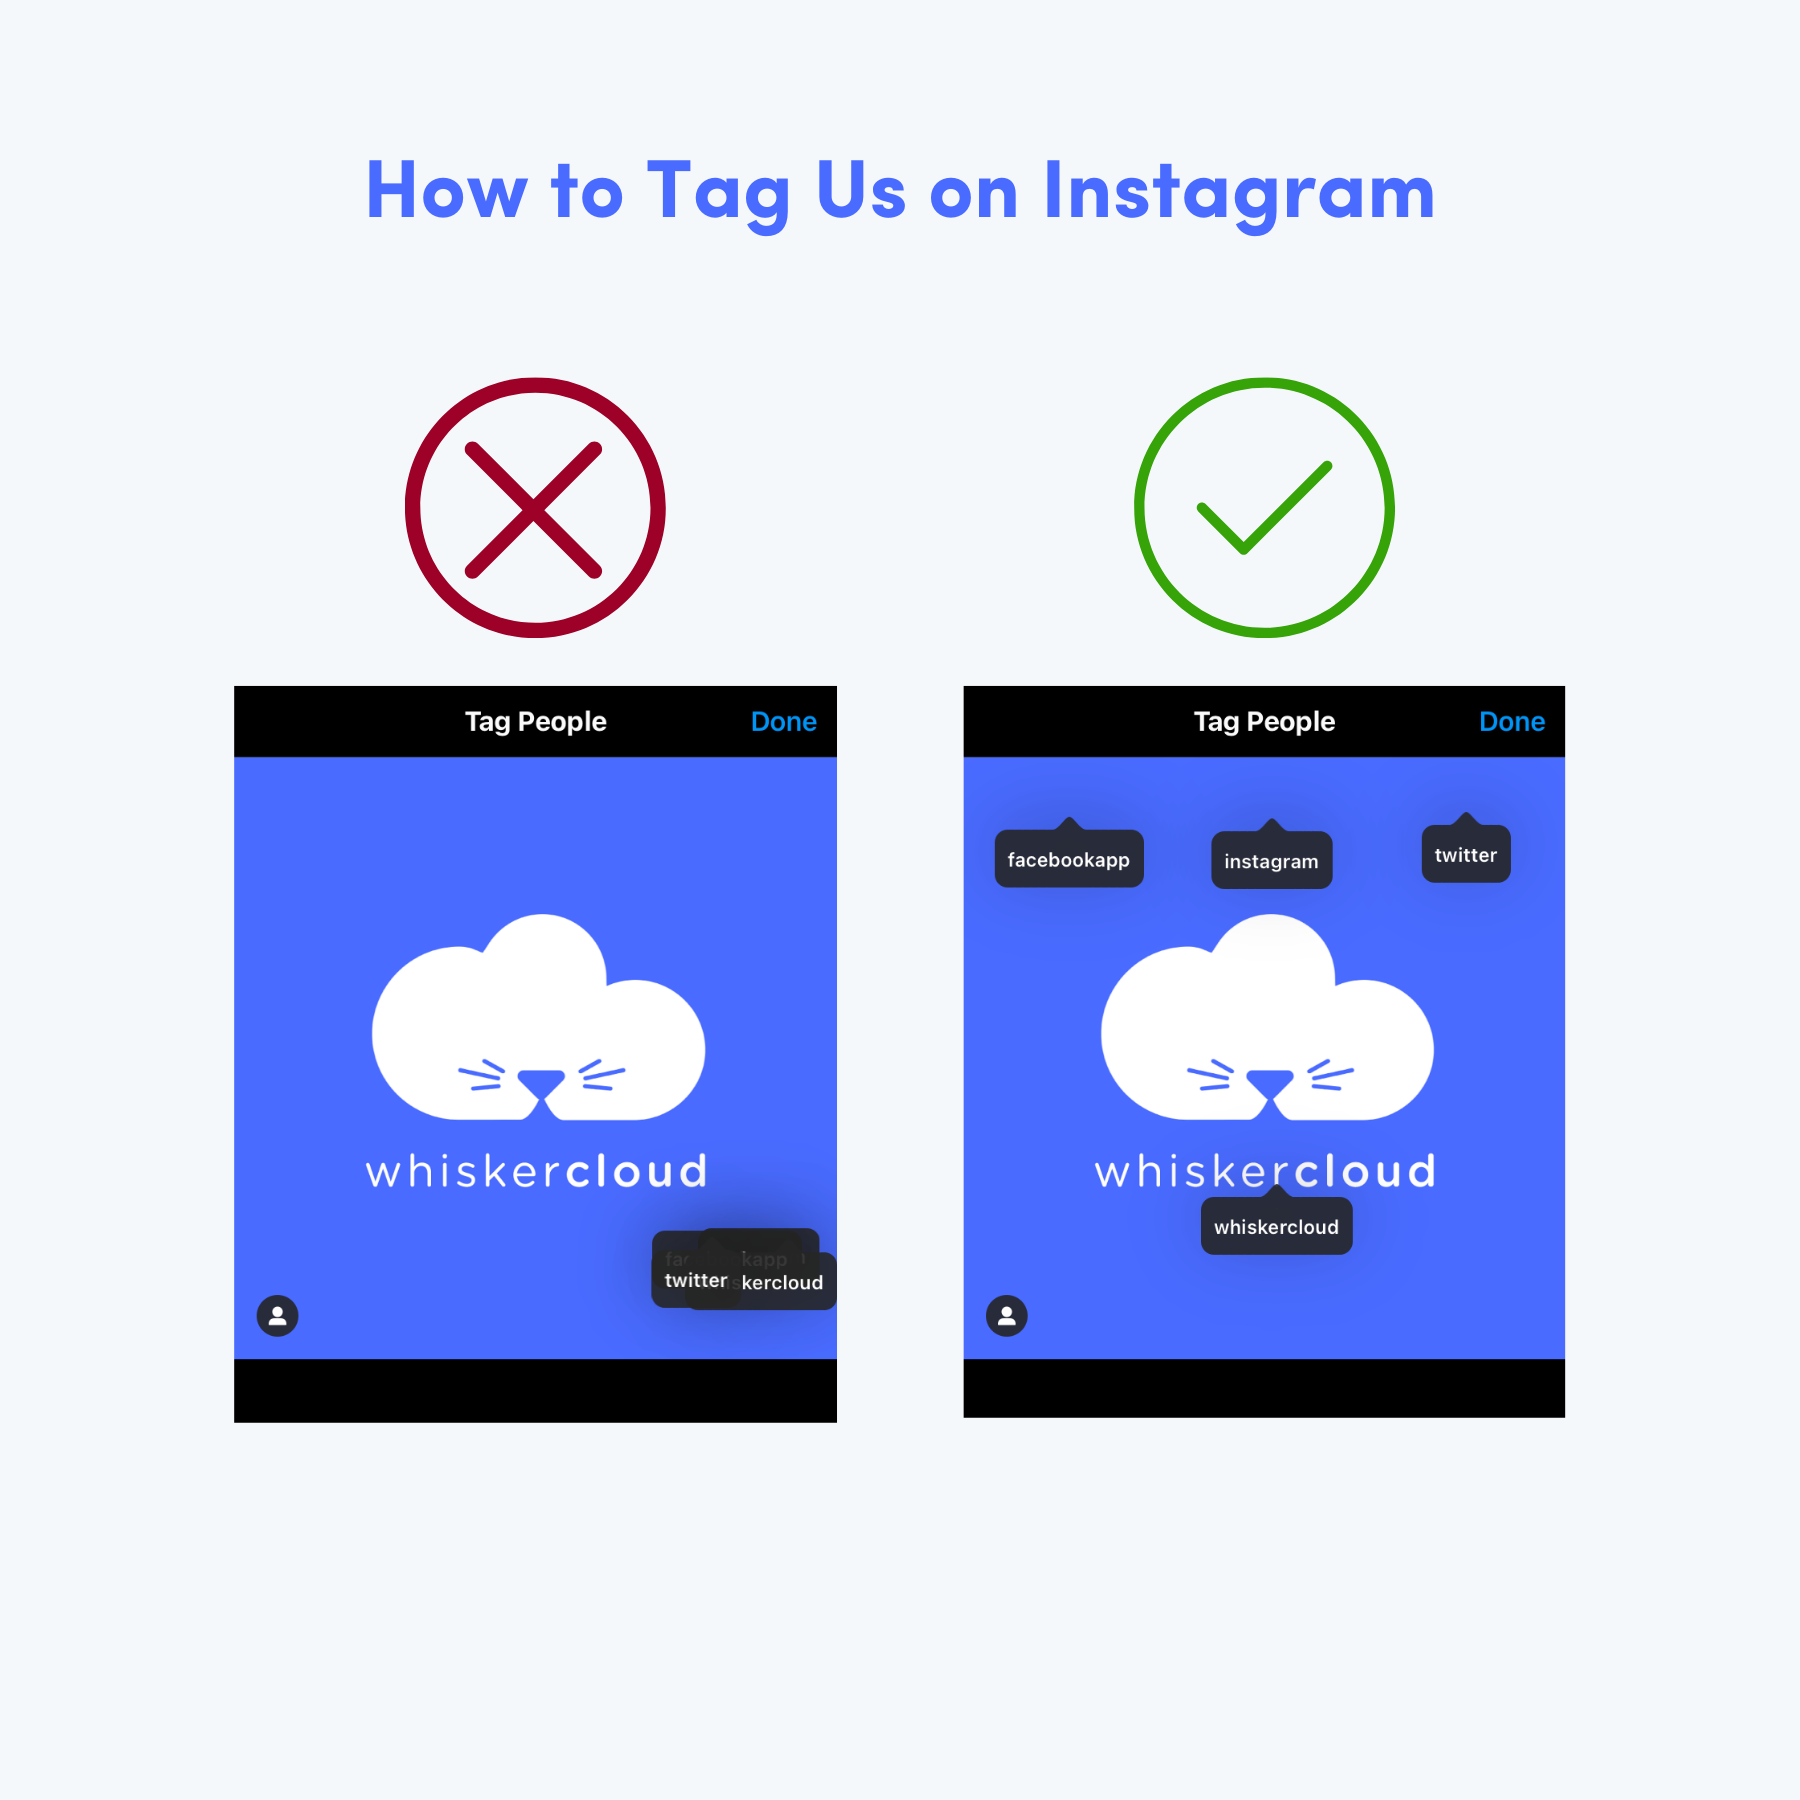 How to Tag us on Instagram